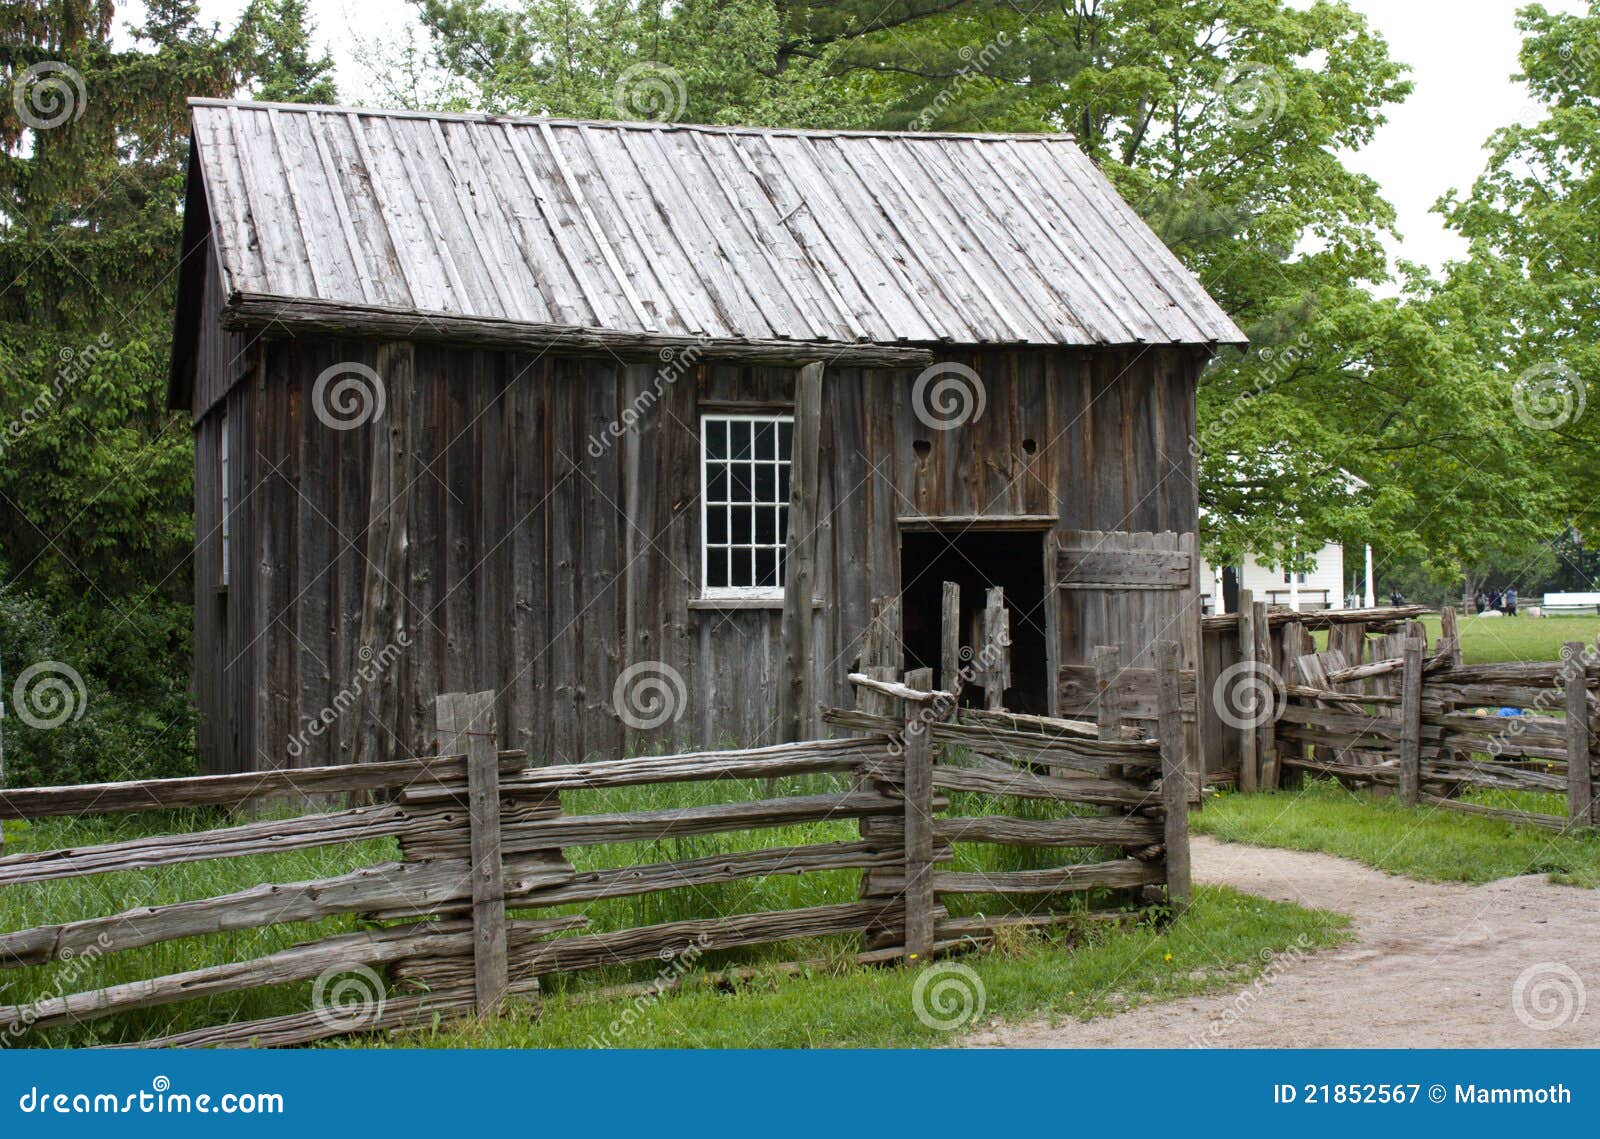 Old wooden shed stock image. Image of house, spring, path ...